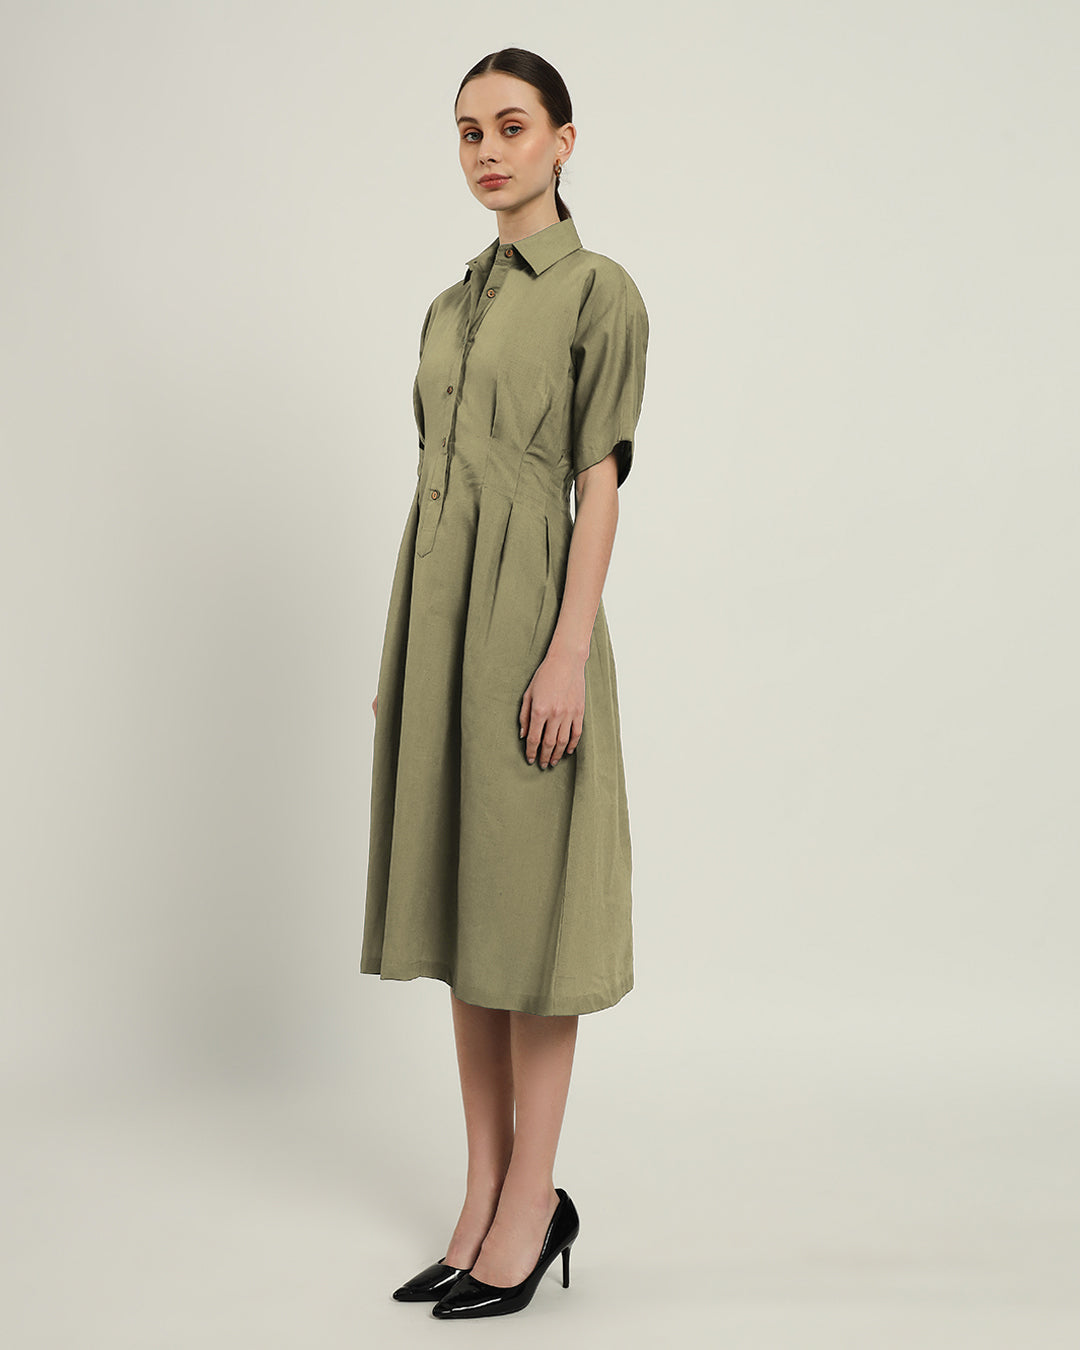 The Salford Daisy Olive Linen Dress